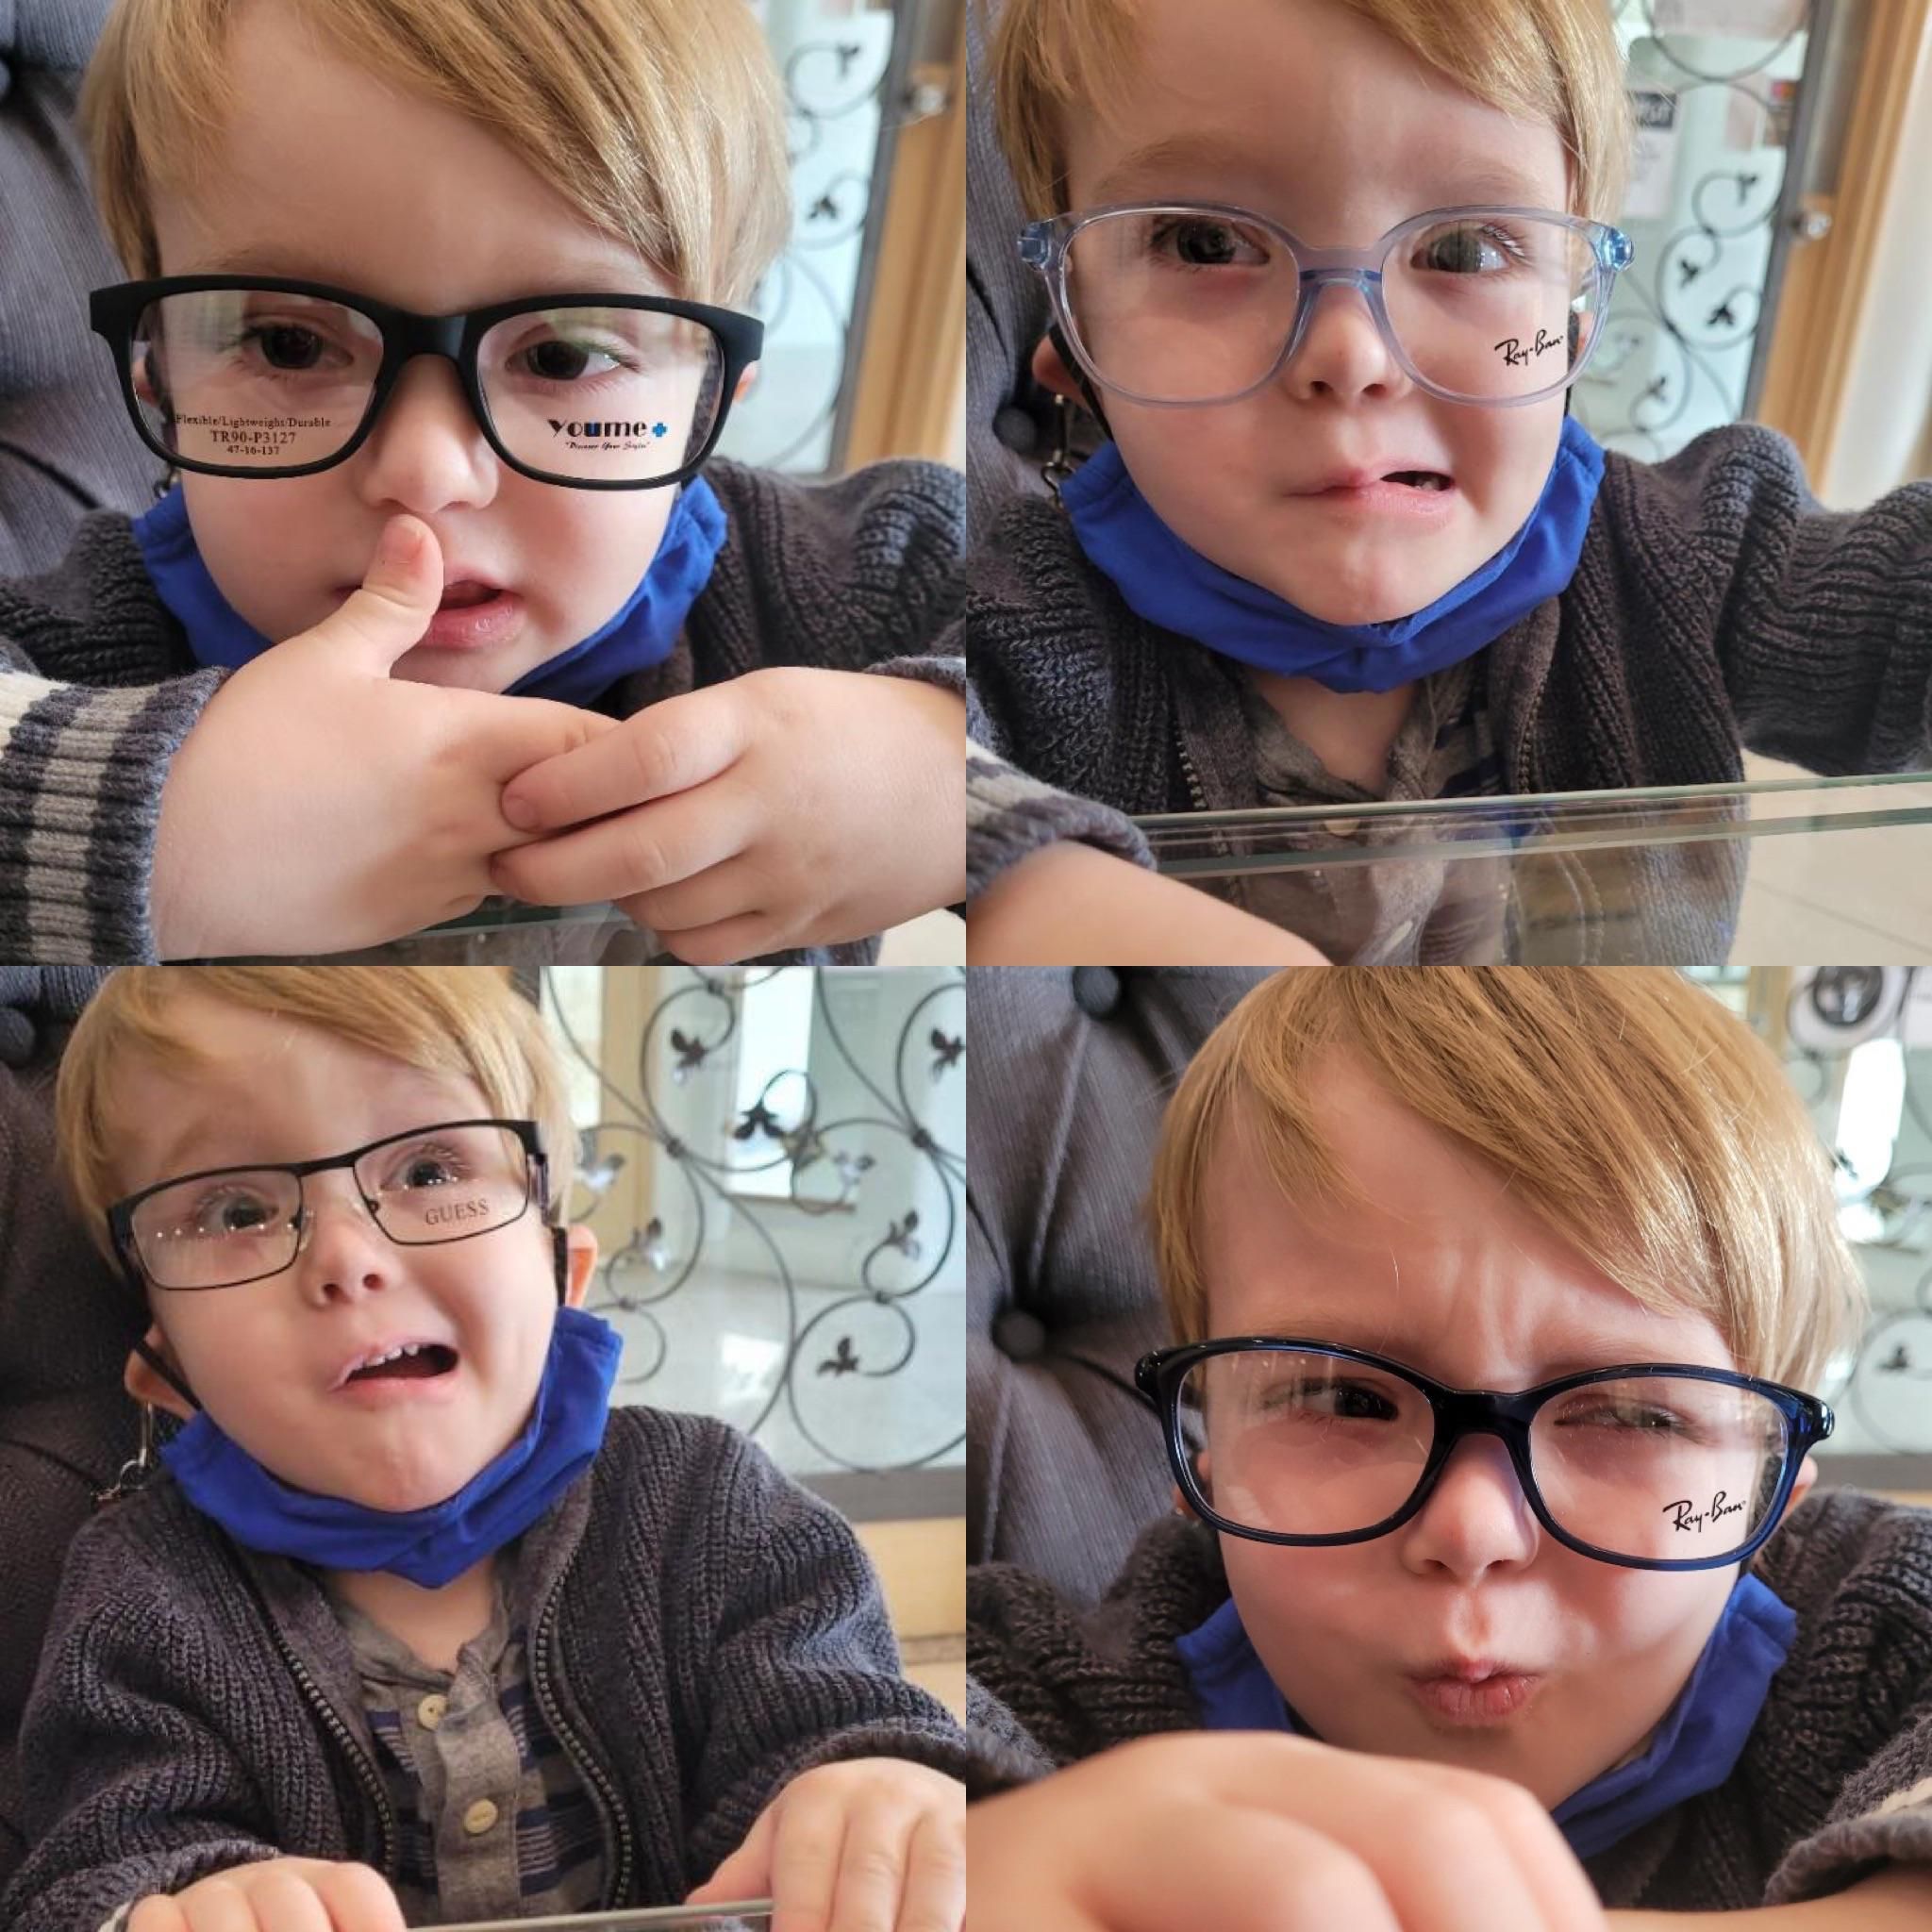 My son is getting his first glasses and my wife sends me these pics and asks which pair I like most.